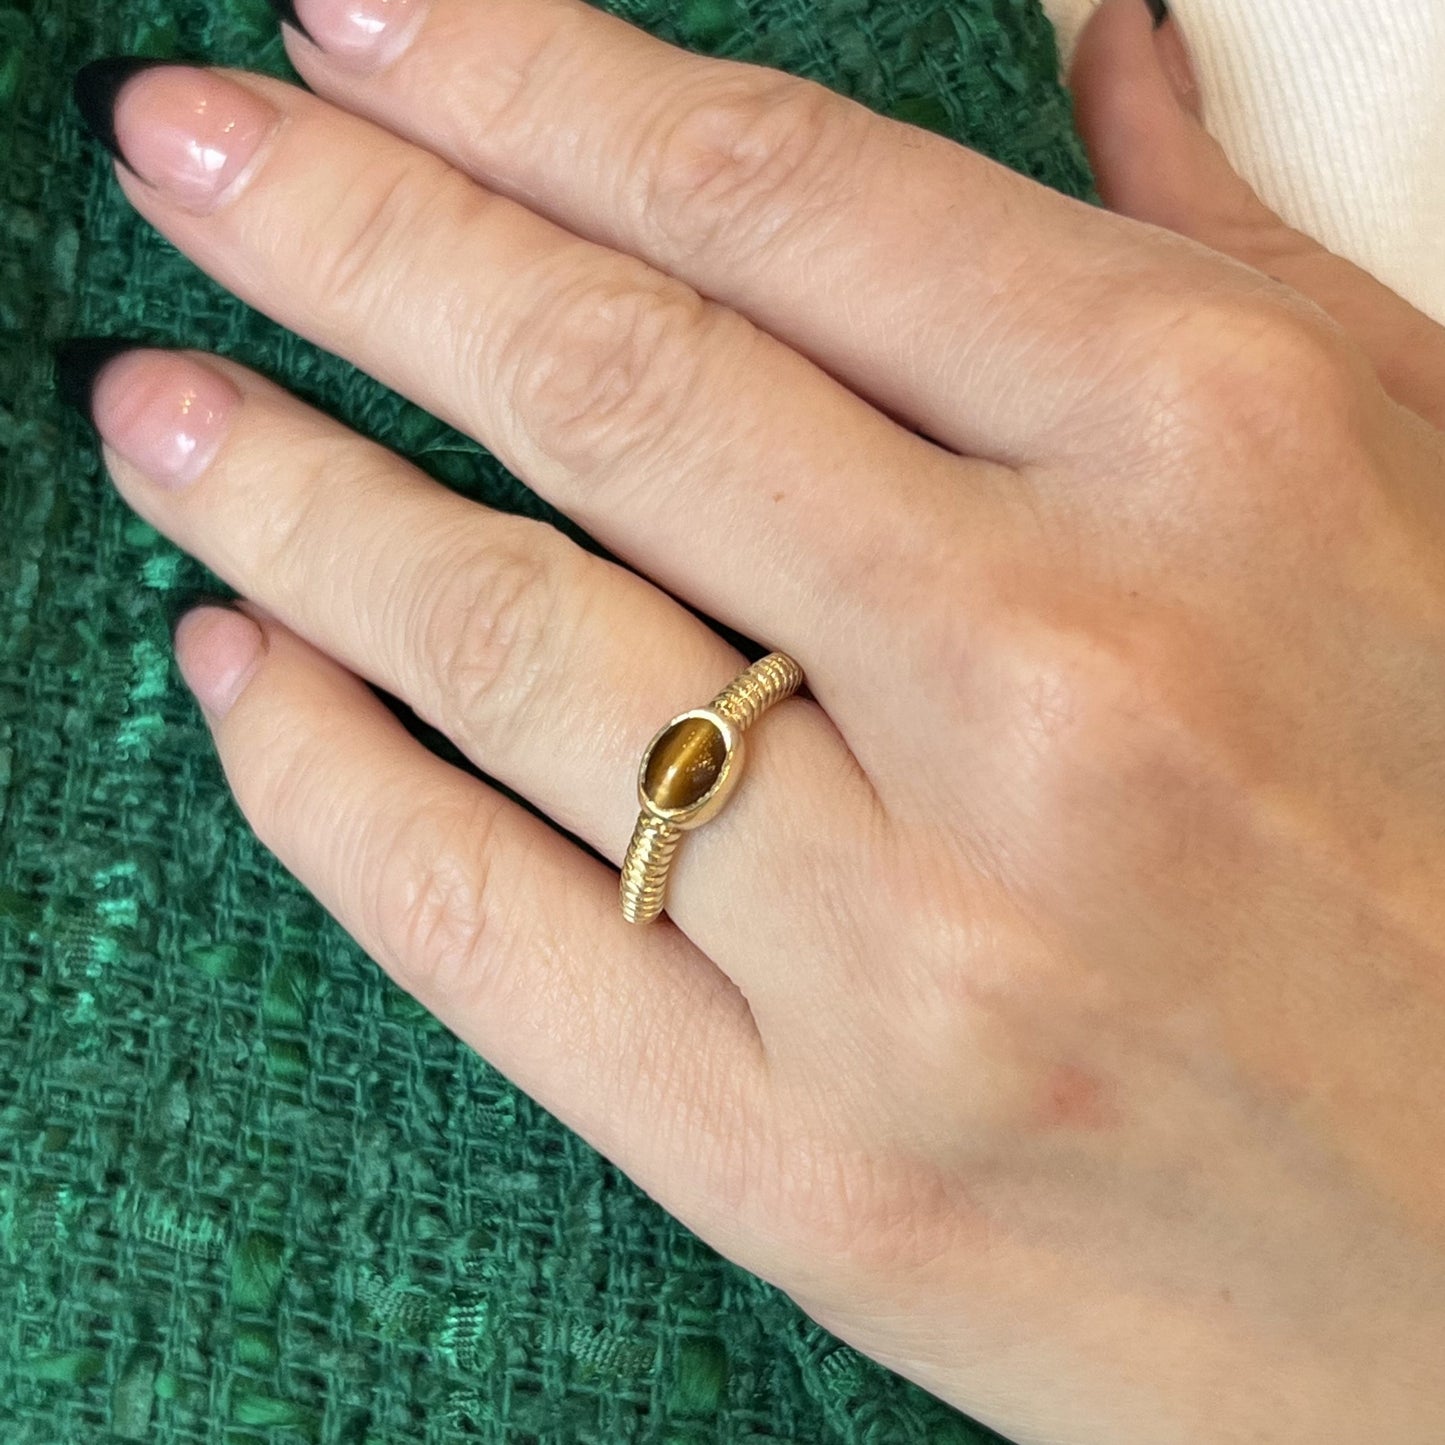 Oval Tiger's Eye Stacking Ring in 14k Yellow Gold